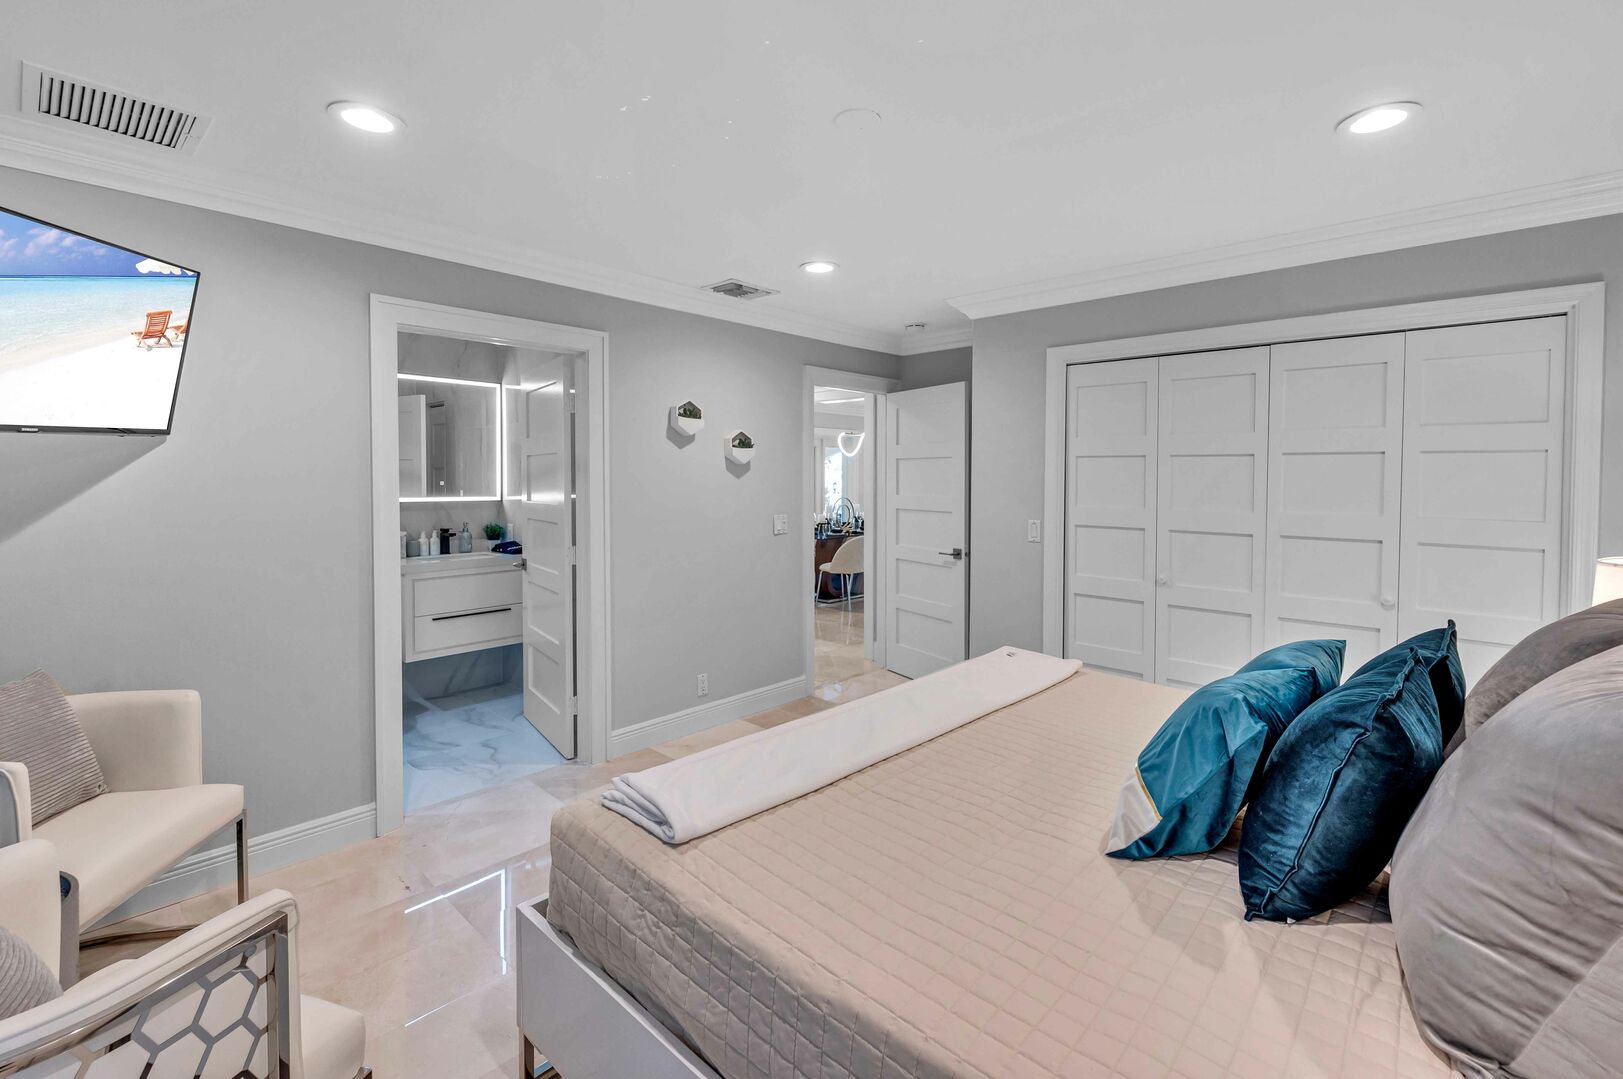 Bedroom five boasts a king bed, ensuite bathroom and smart TV.